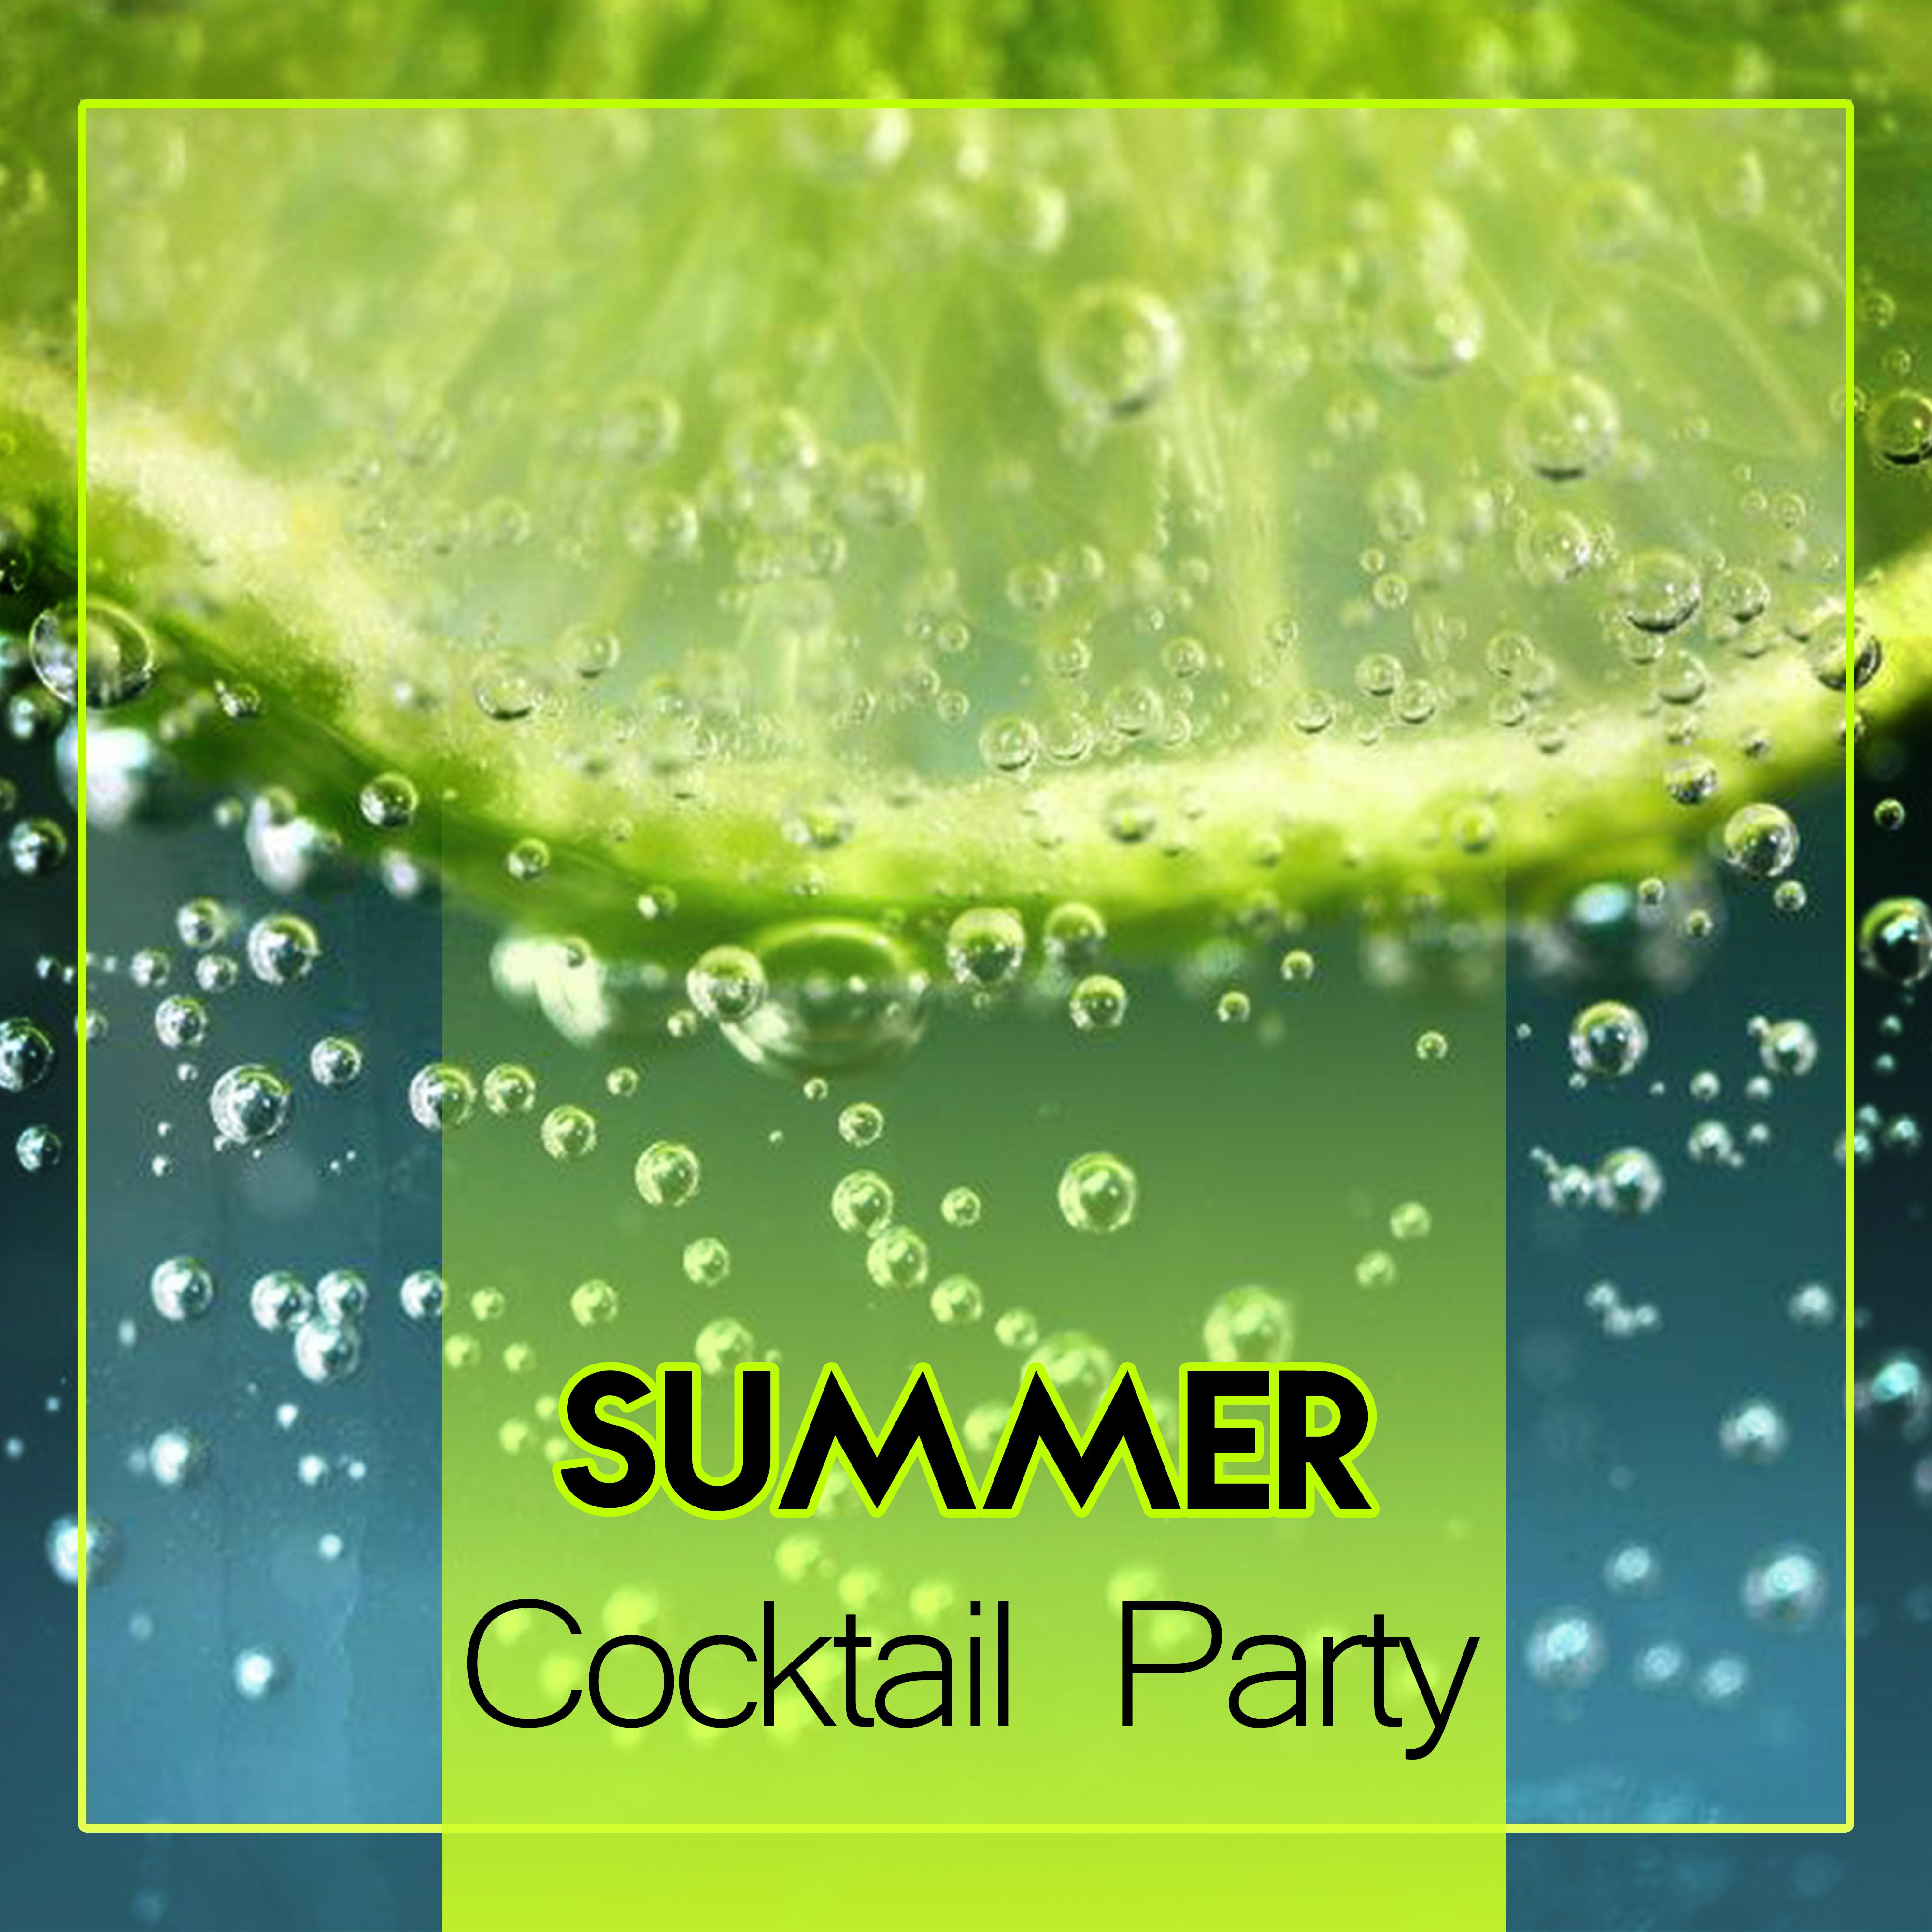 Summer Cocktail Party – **** Vibes, Dancefloor, Chillout Hits 2017, Ibiza Lounge Club, Palma de Lounge, Party Night